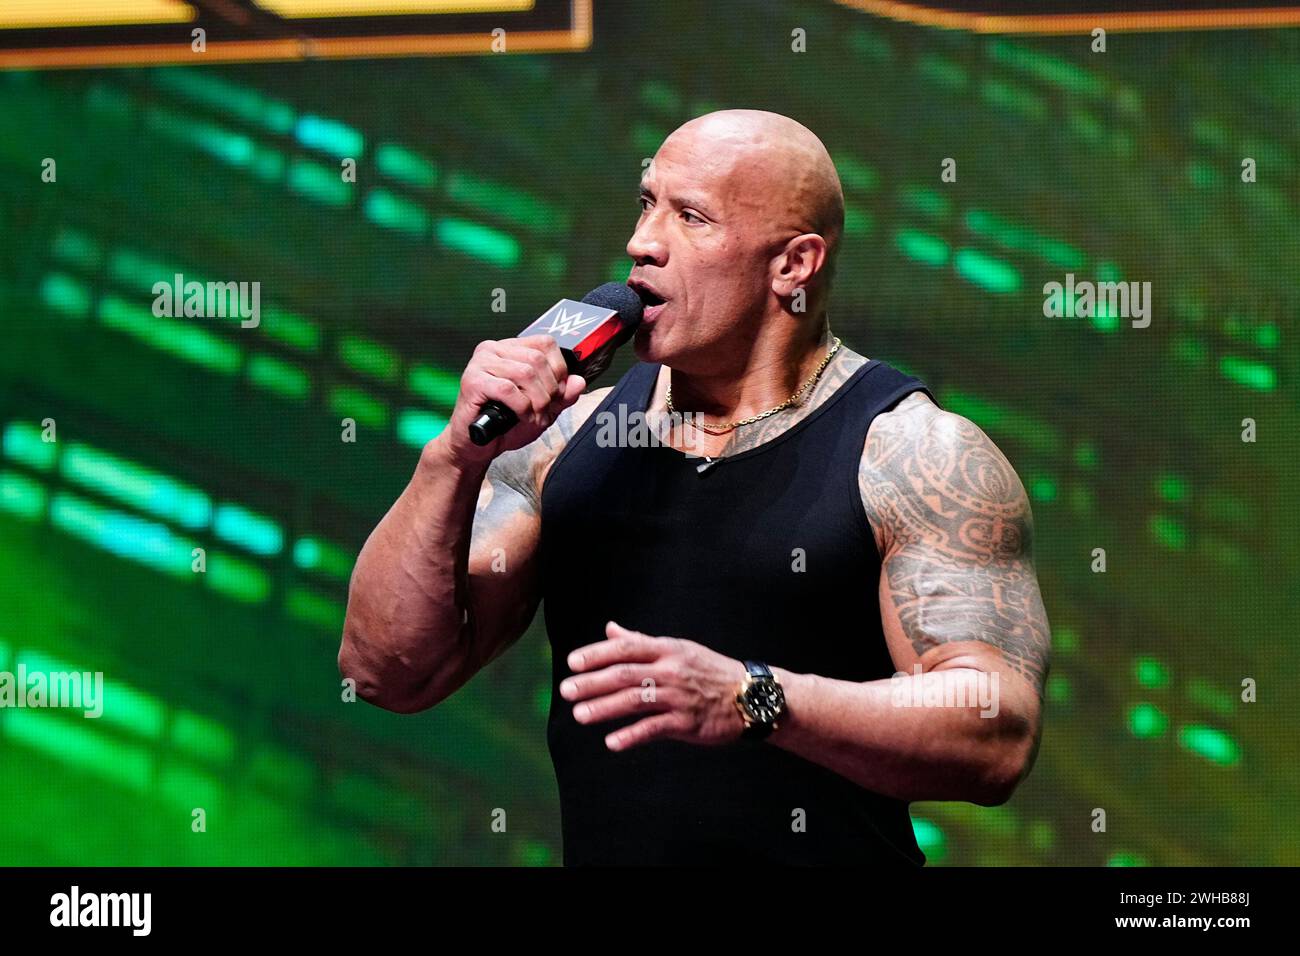 Las Vegas Nv February 8 2024 Dwayne The Rock Johnson Ten Time Wwe World Champion At T Mobile Arena For Wrestlemania Xl Kickoff On February 8 2024 In Las Vegas Nv United States Photo By Louis Grassepximages 2WHB88J 